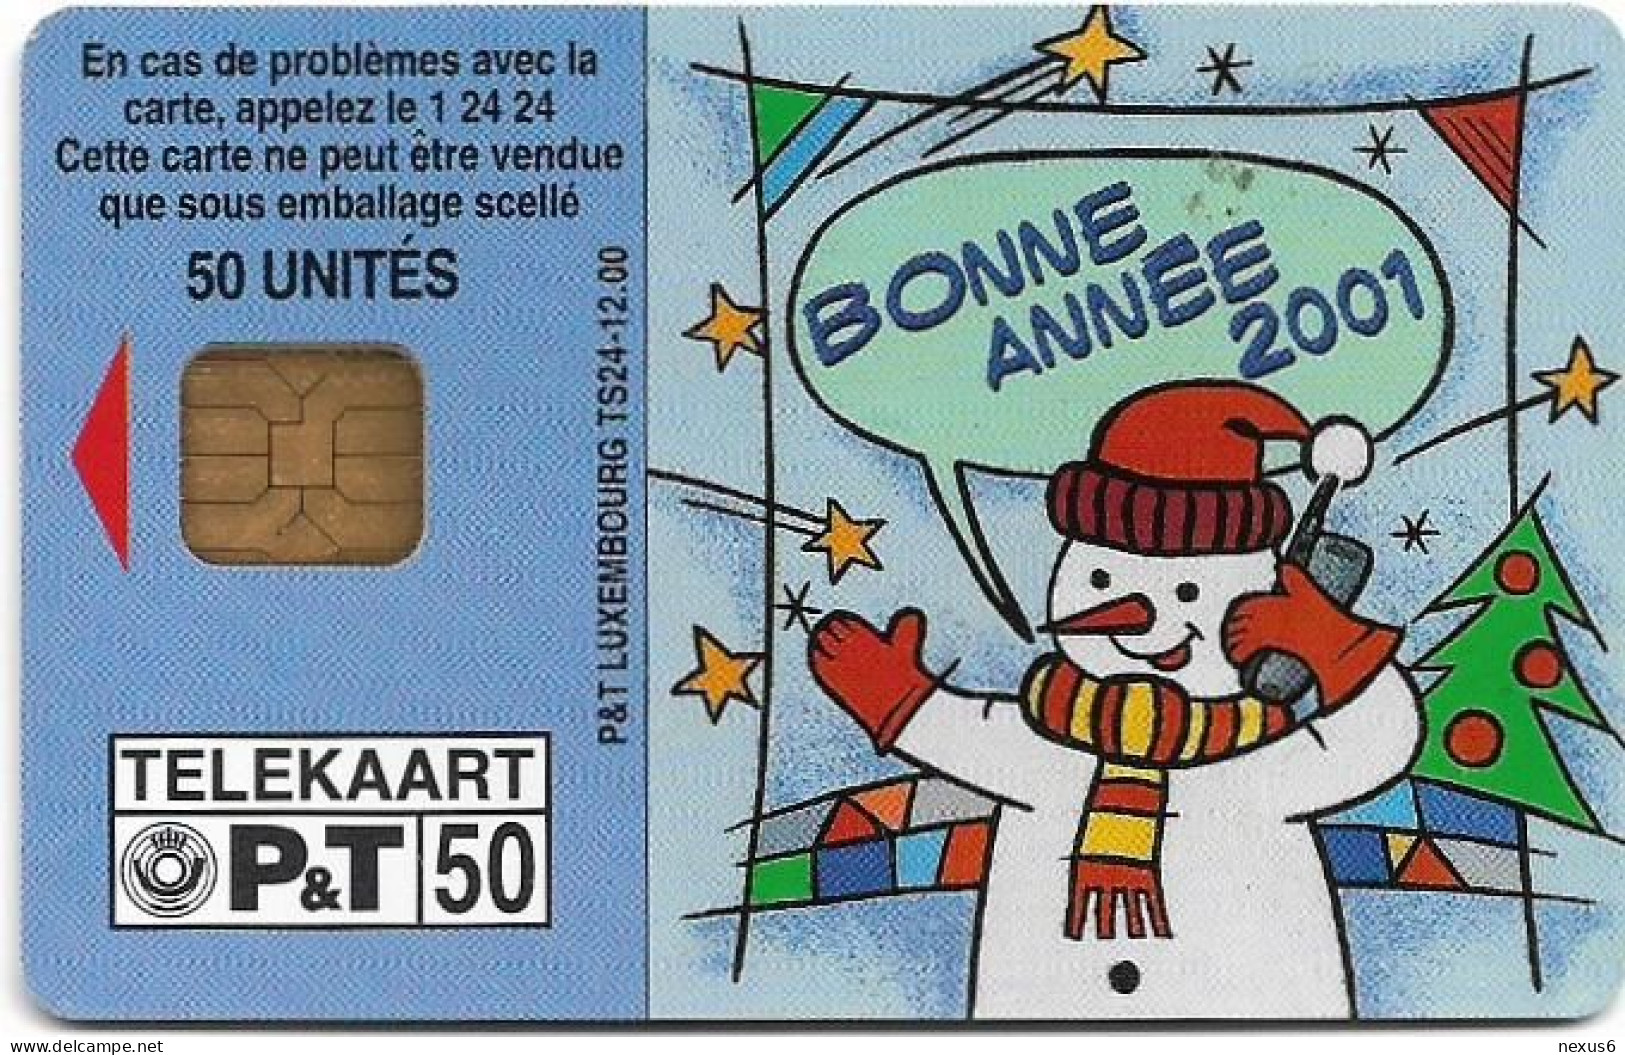 Luxembourg - P&T - Bonne Année 2001, 12.2000, 50Units, Used - Luxembourg